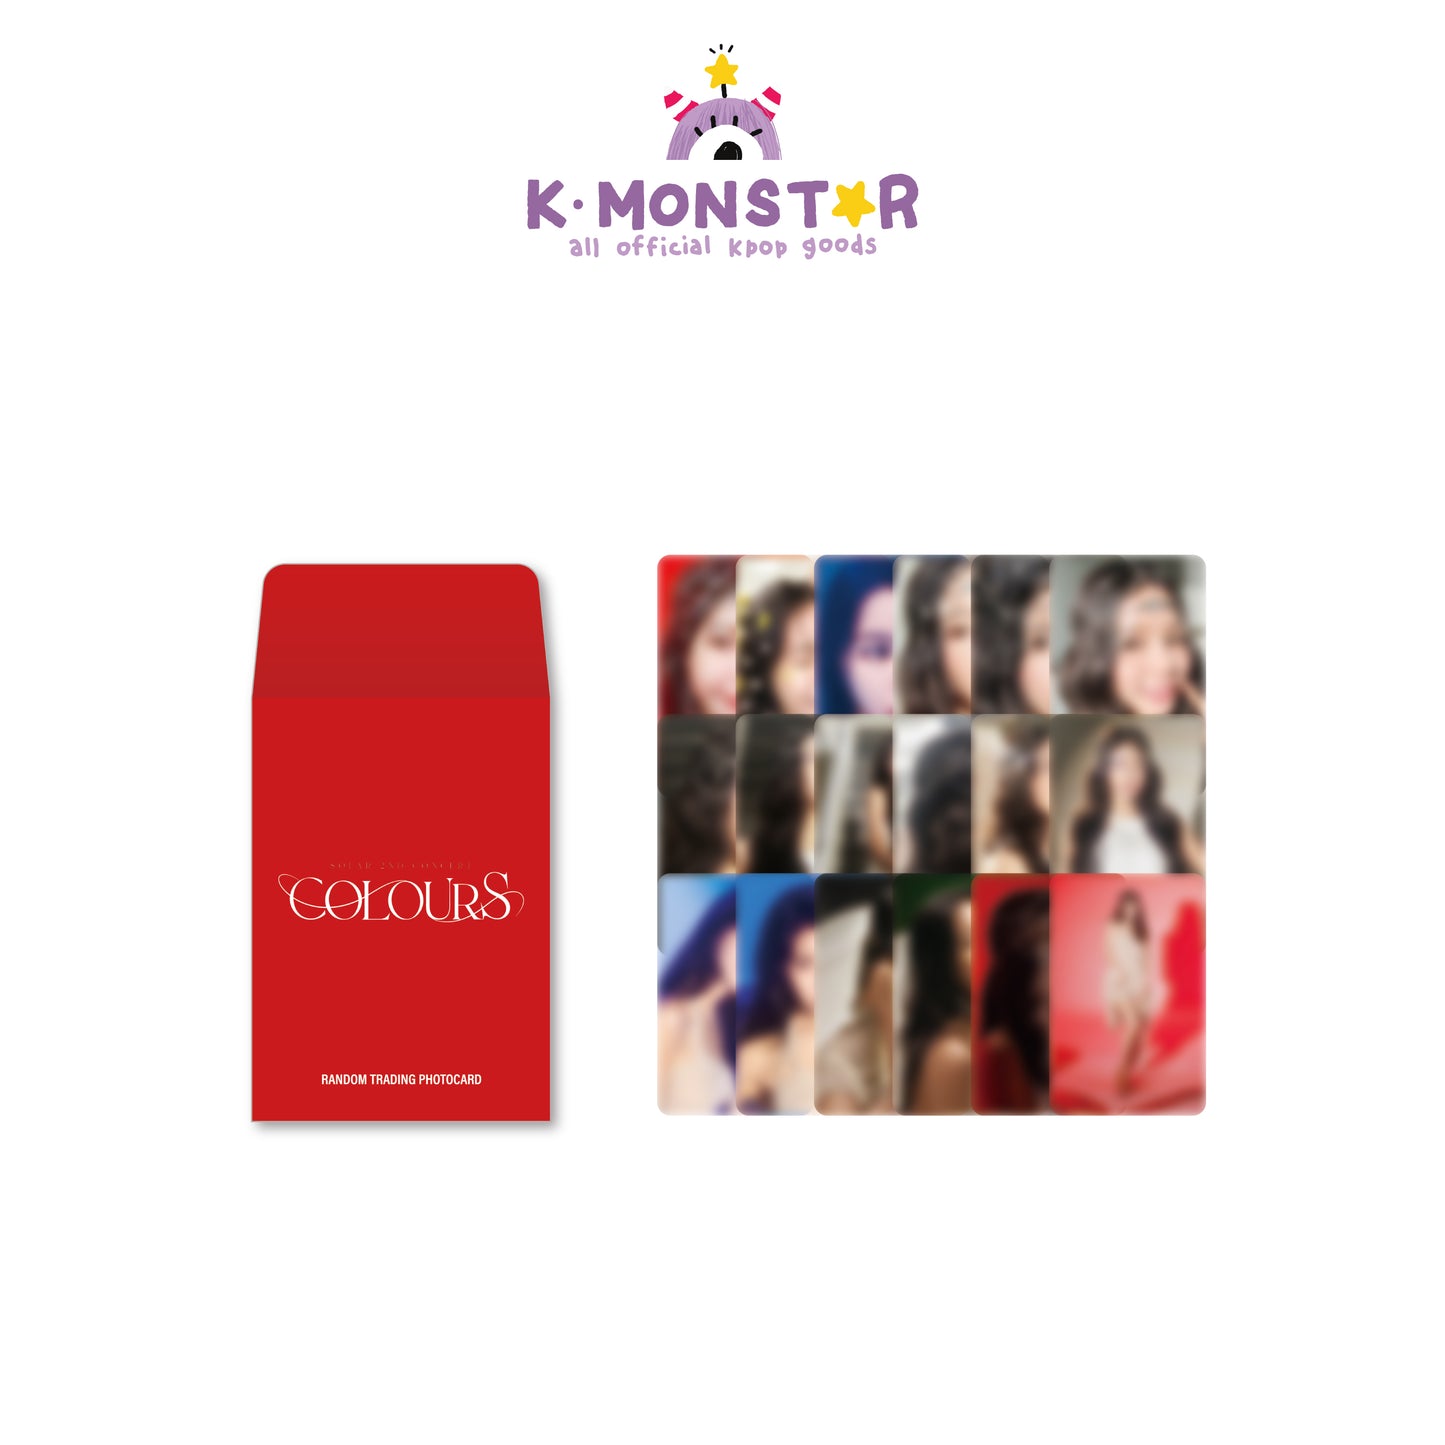 MAMAMOO | SOLAR - 2ND CONCERT | COLOURS OFFICIAL MD - RANDOM TRADING CARD